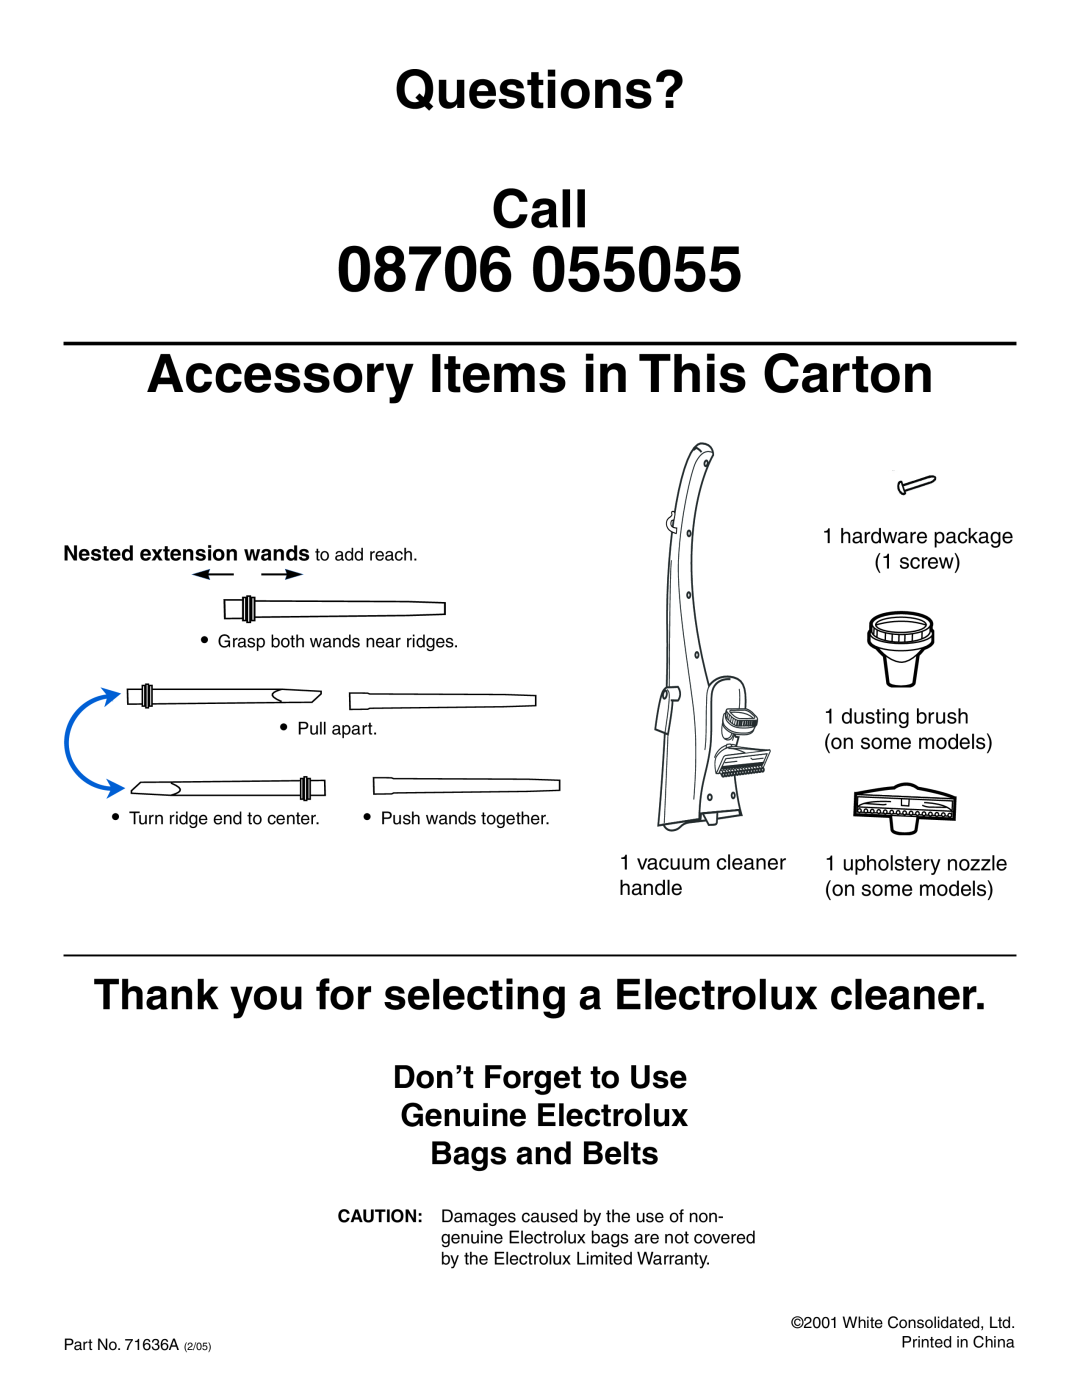 Electrolux Z2270-Z2290 Series Questions? Call, Accessory Items in This Carton, Nested extension wands to add reach, 08706 